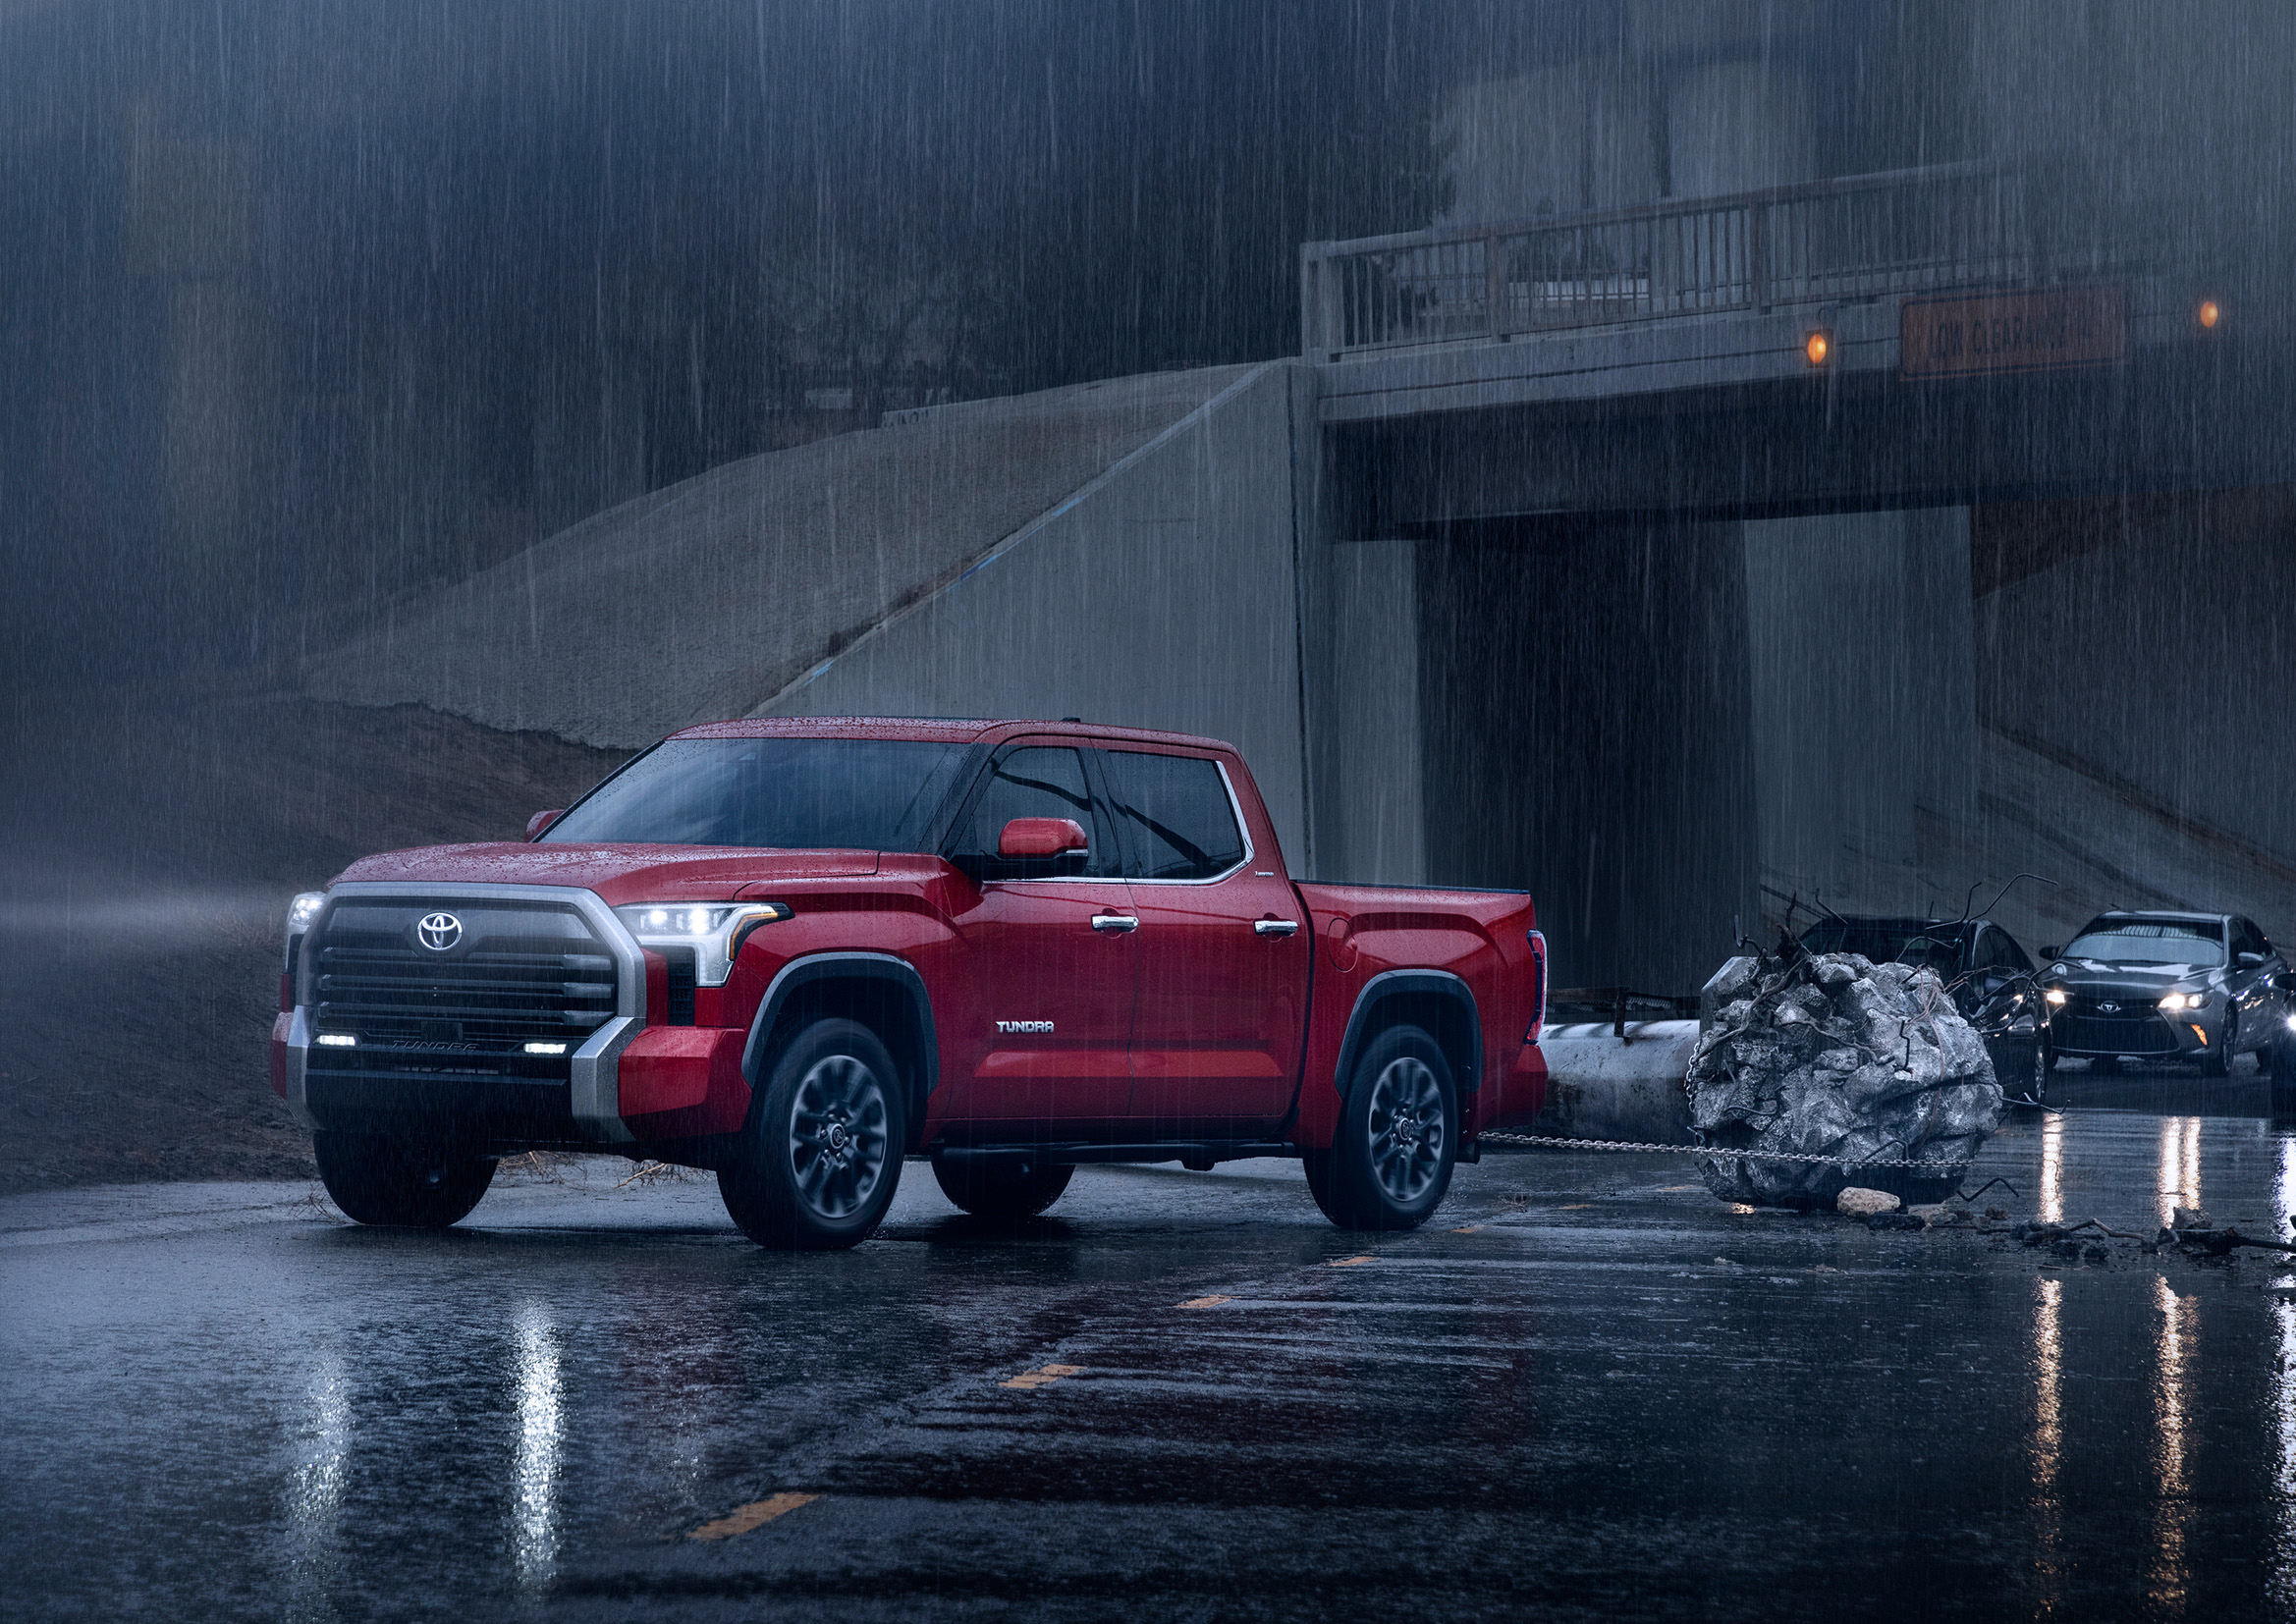 Conill Advertising developed the spot “Born to Lend a Hand” for the all-new 2022 Toyota Tundra campaign.